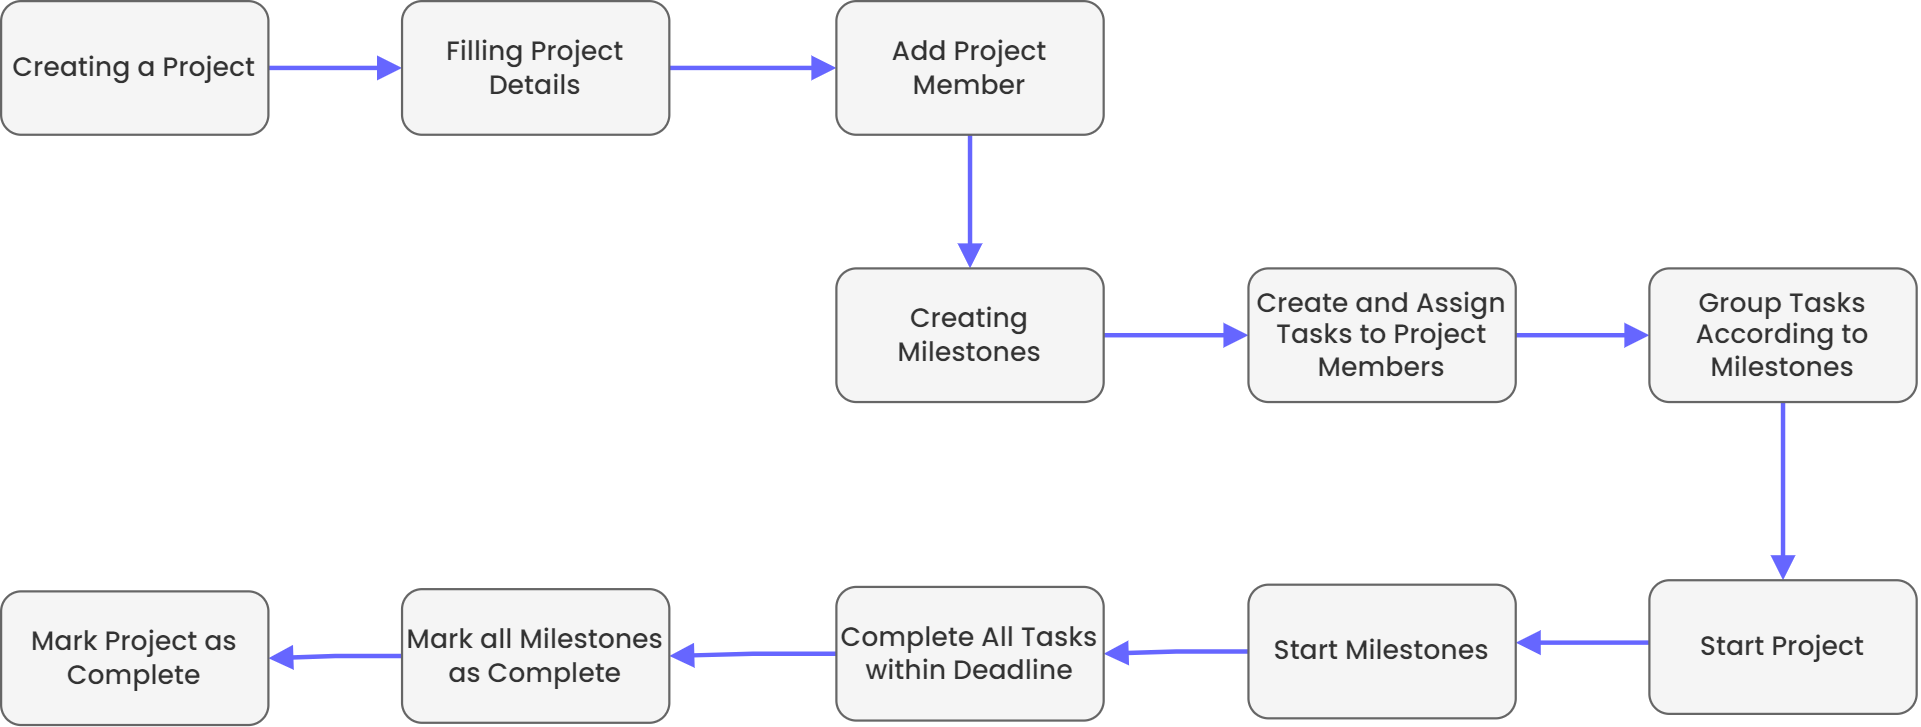 Workflow of Project